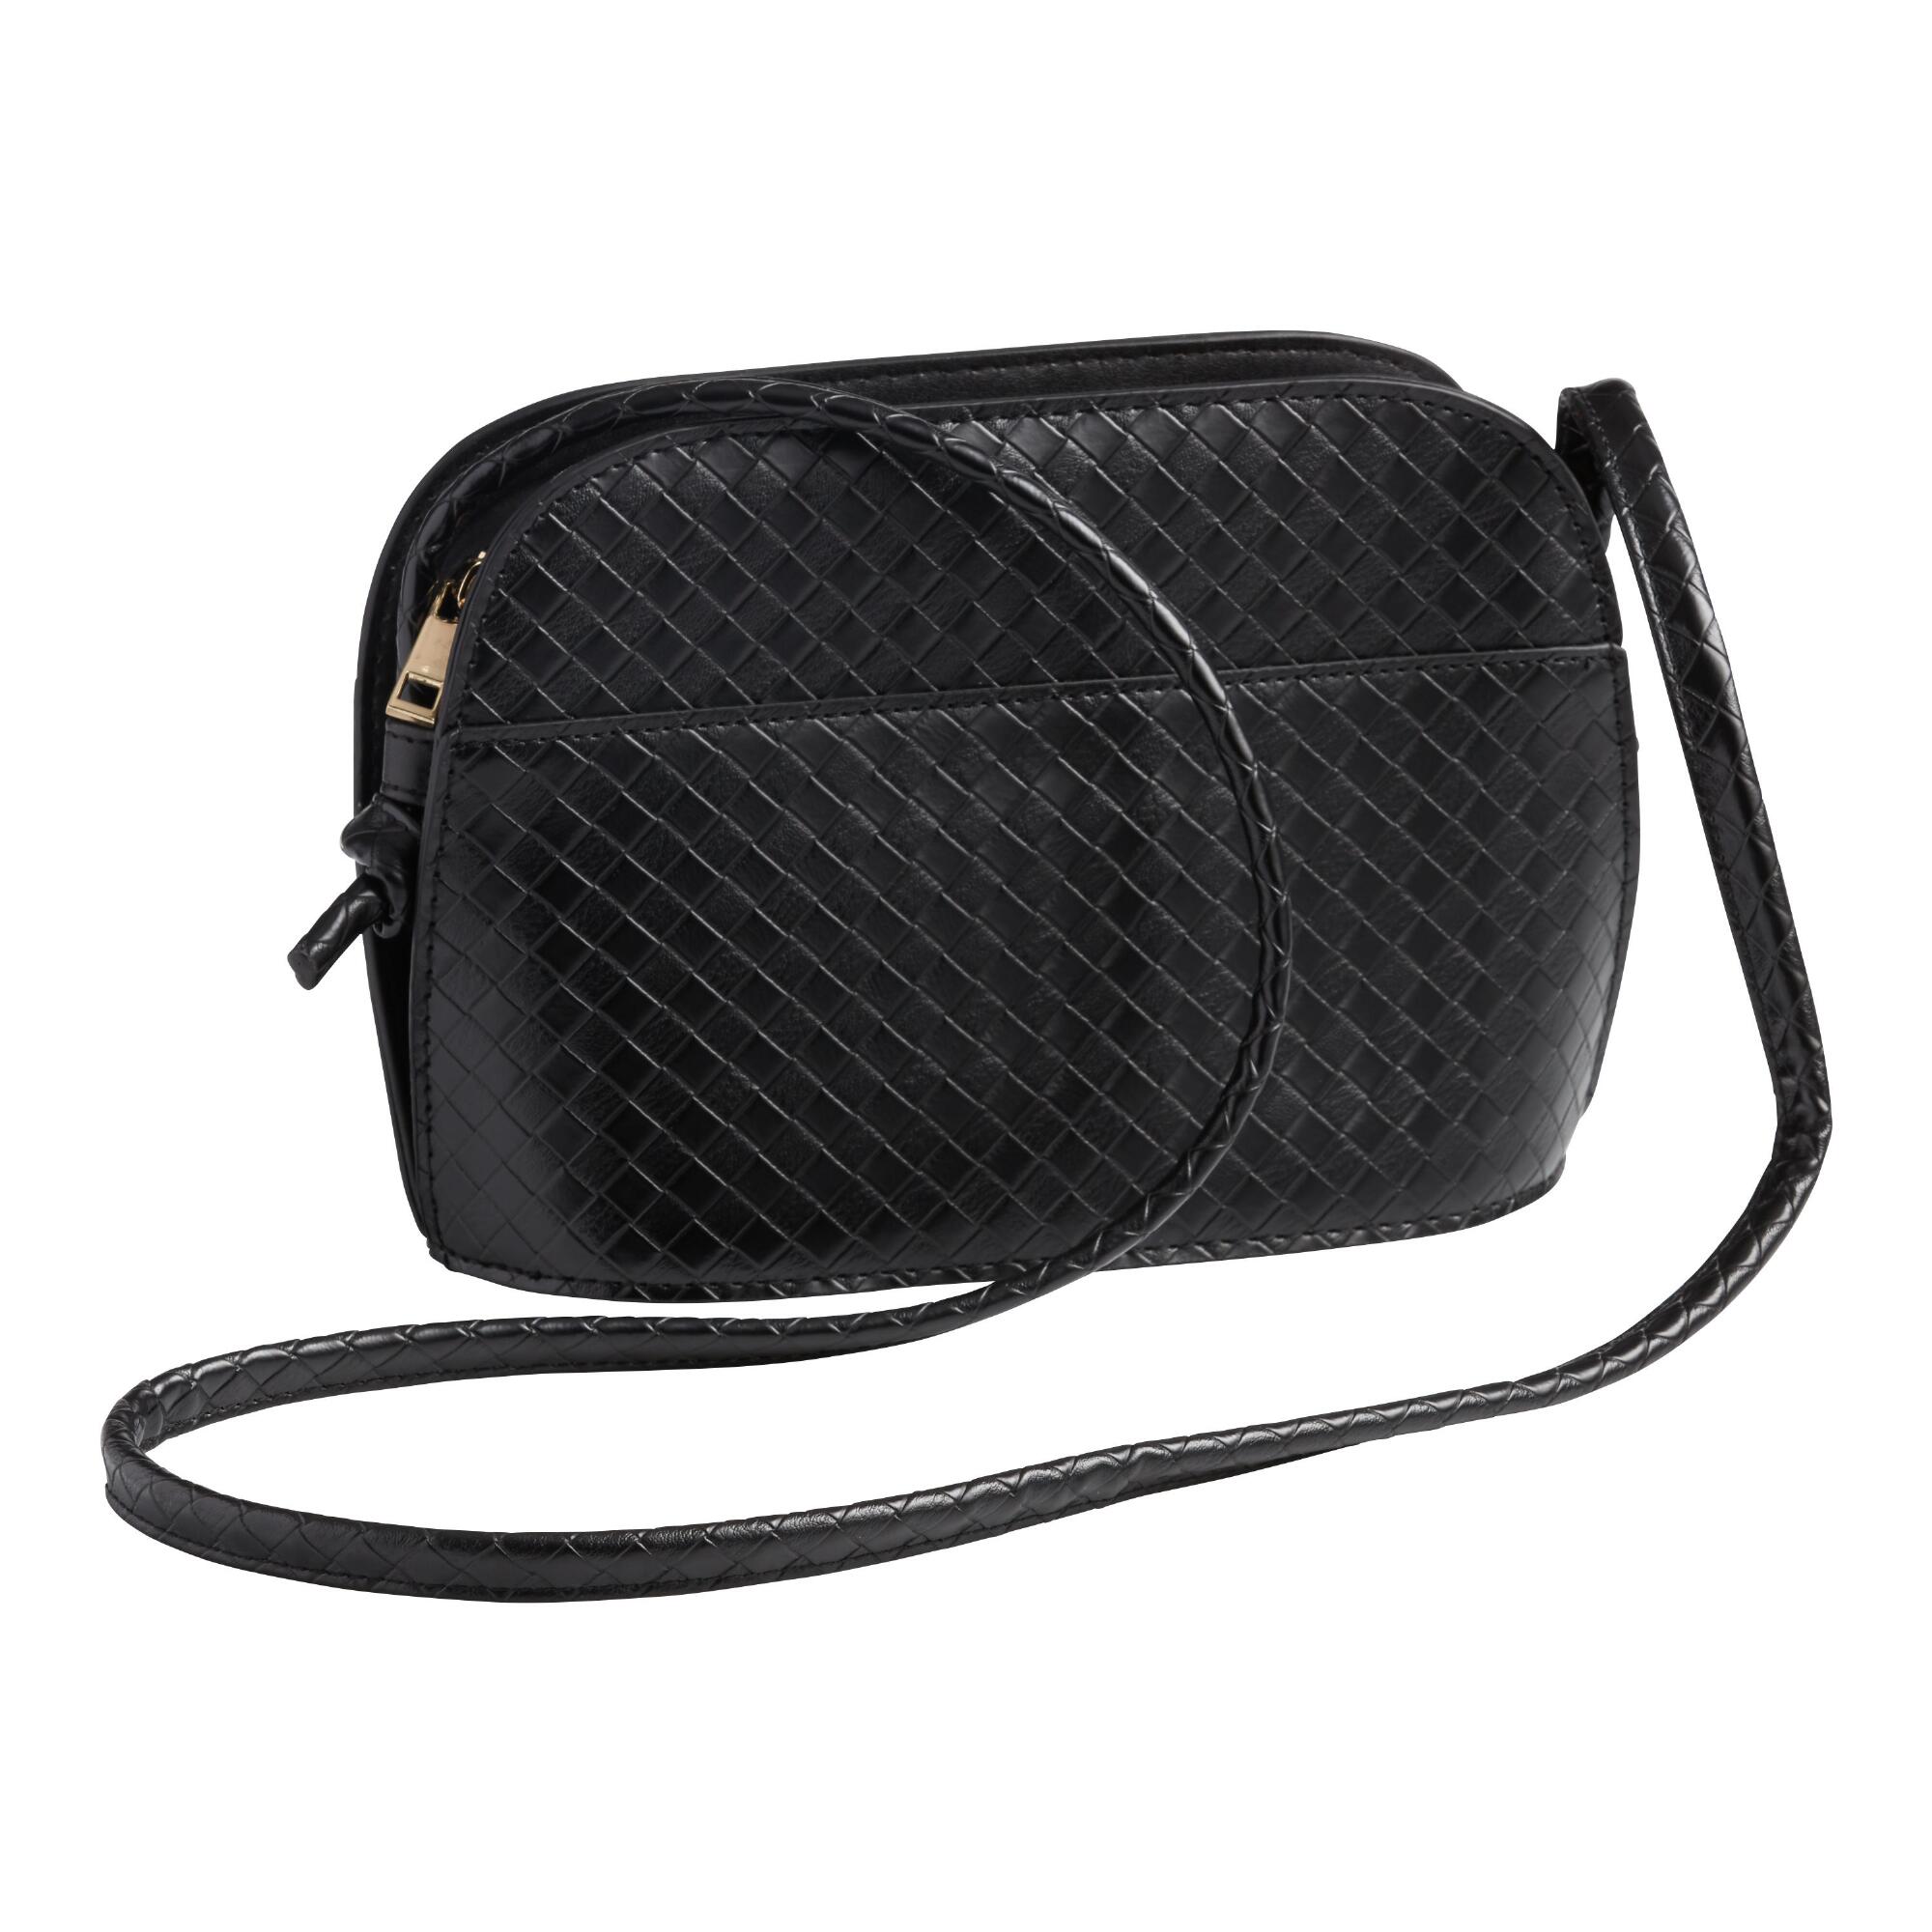 Black Textured Faux Leather Crossbody Bag by World Market